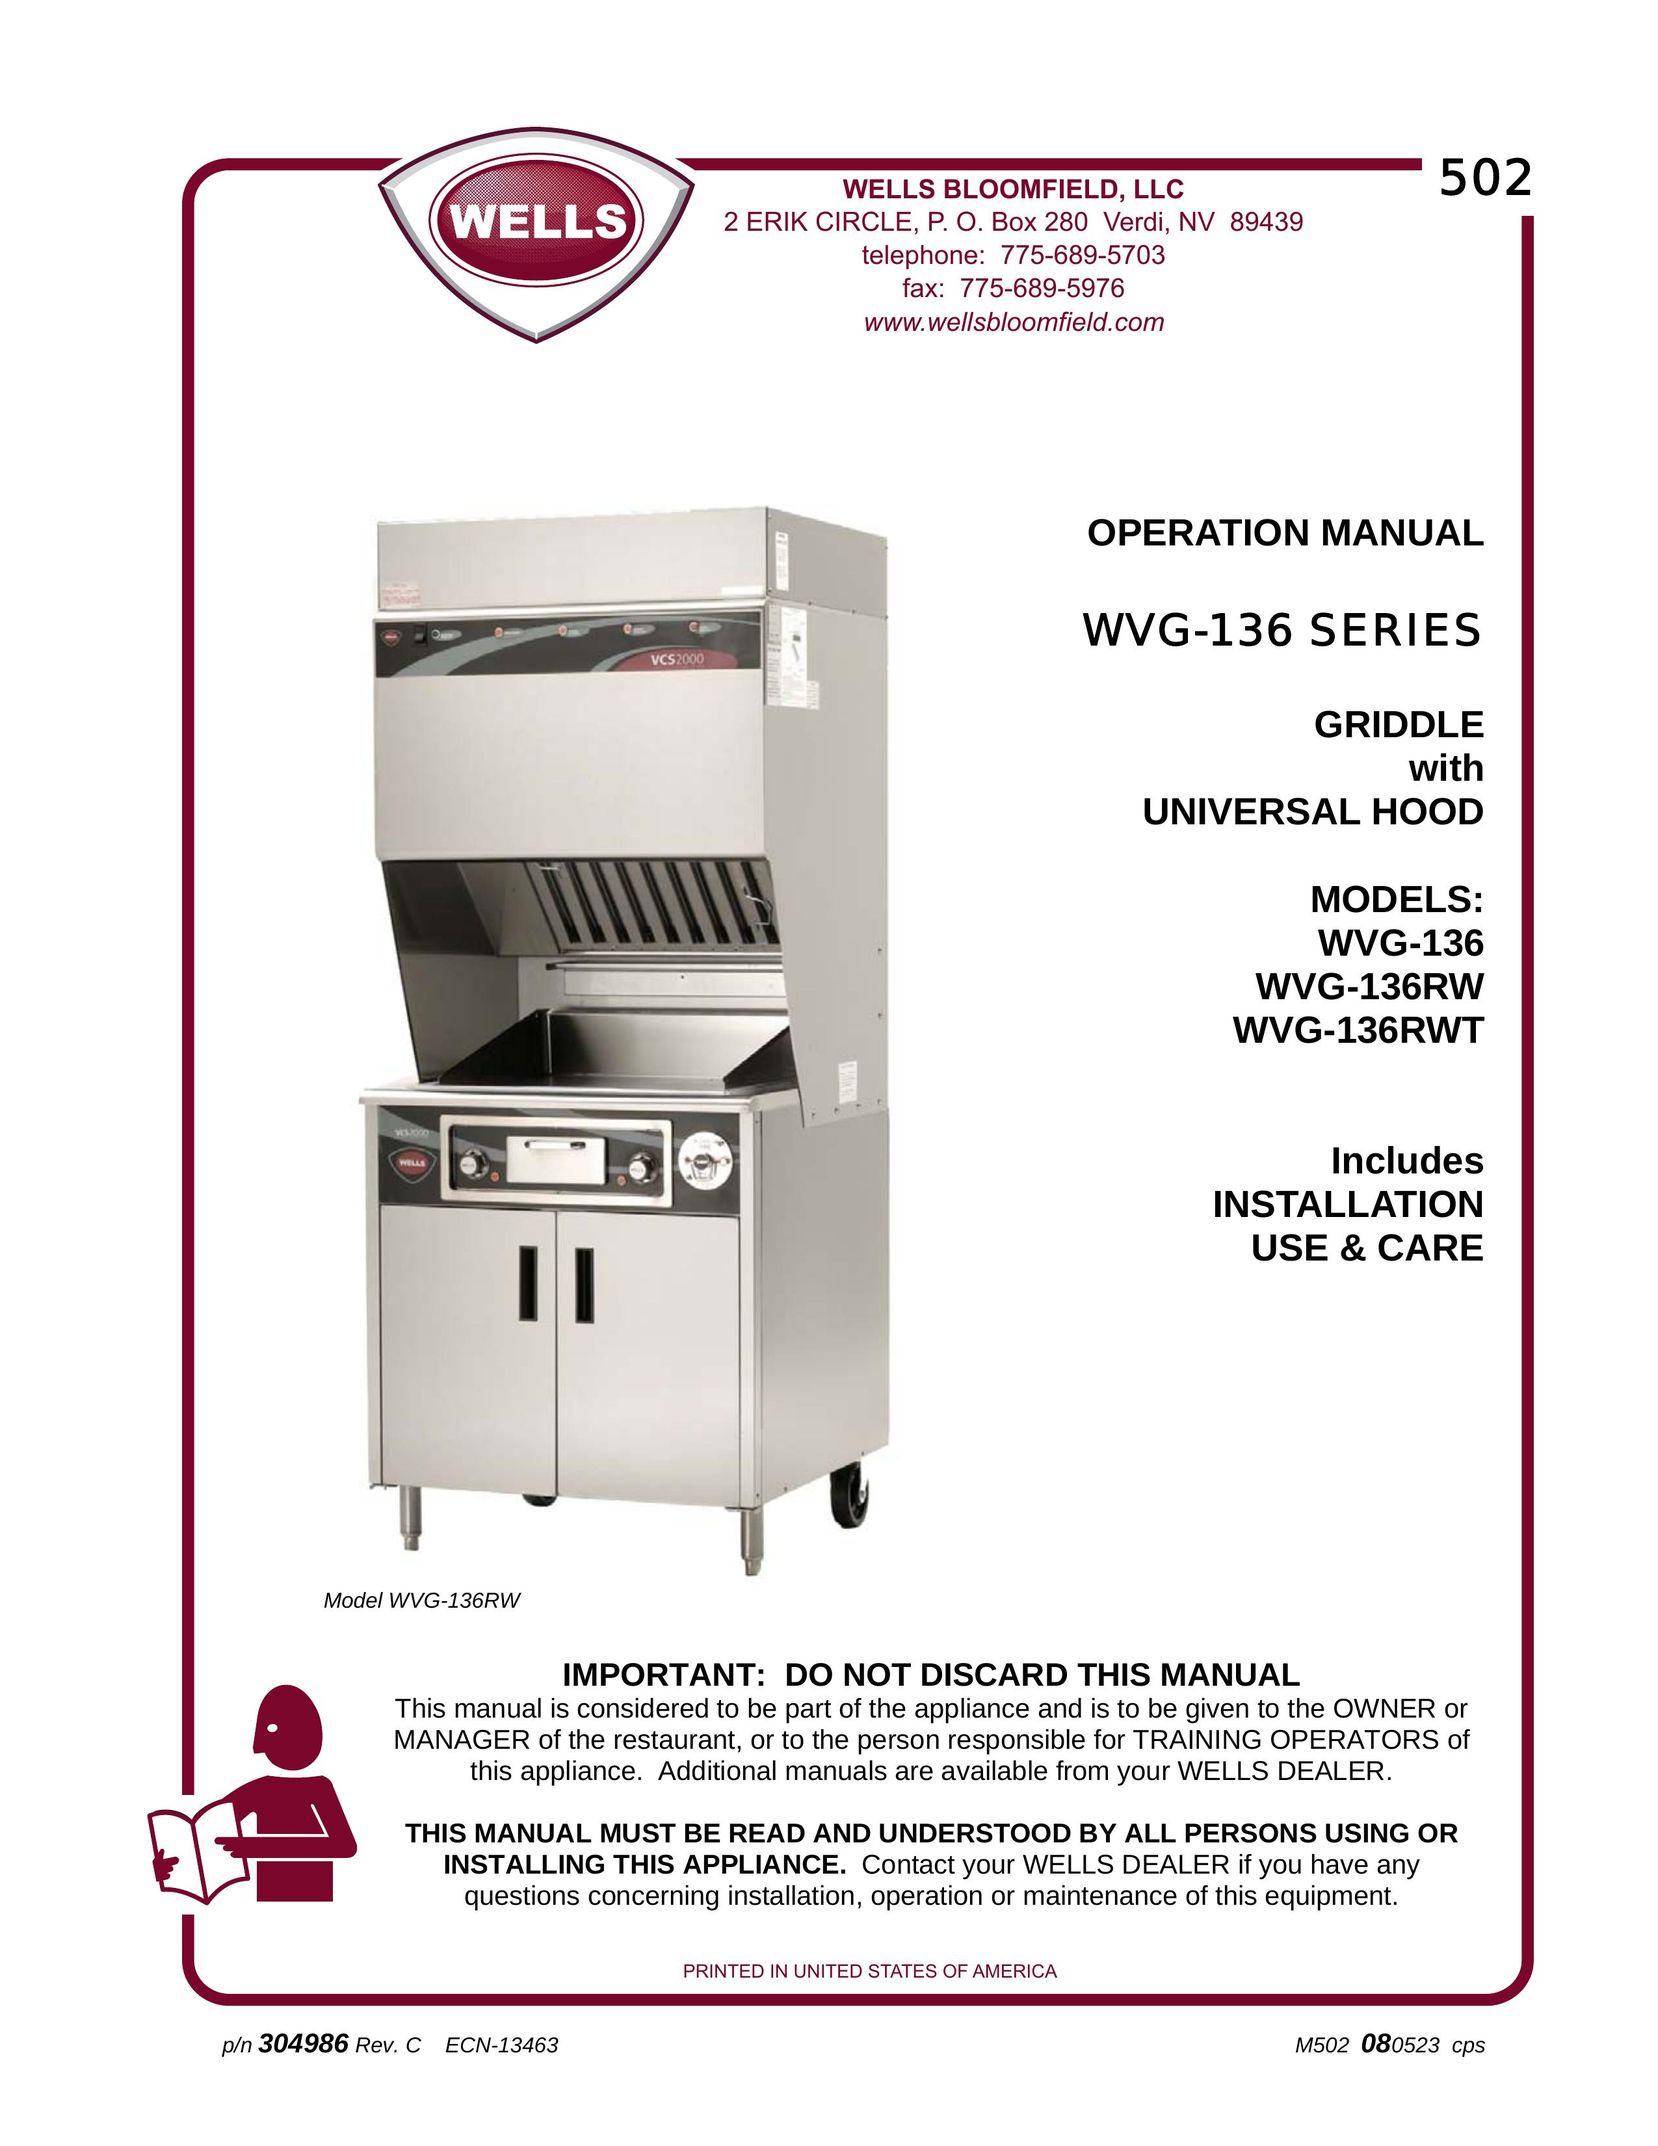 Bloomfield WVG-136RWT Griddle User Manual